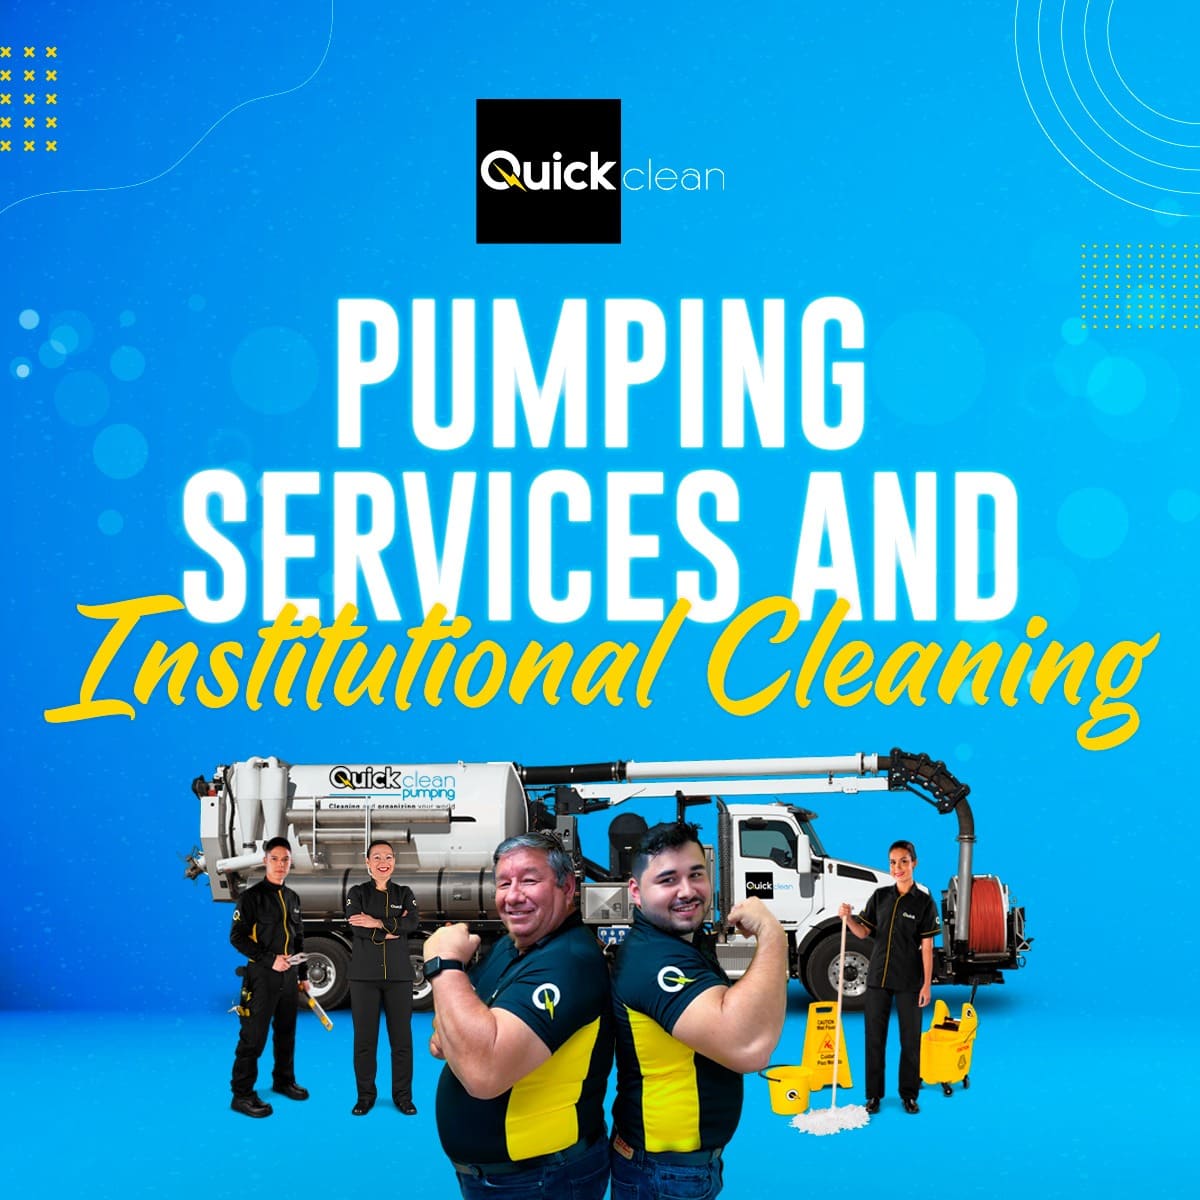 Pumping services and institutional cleaning